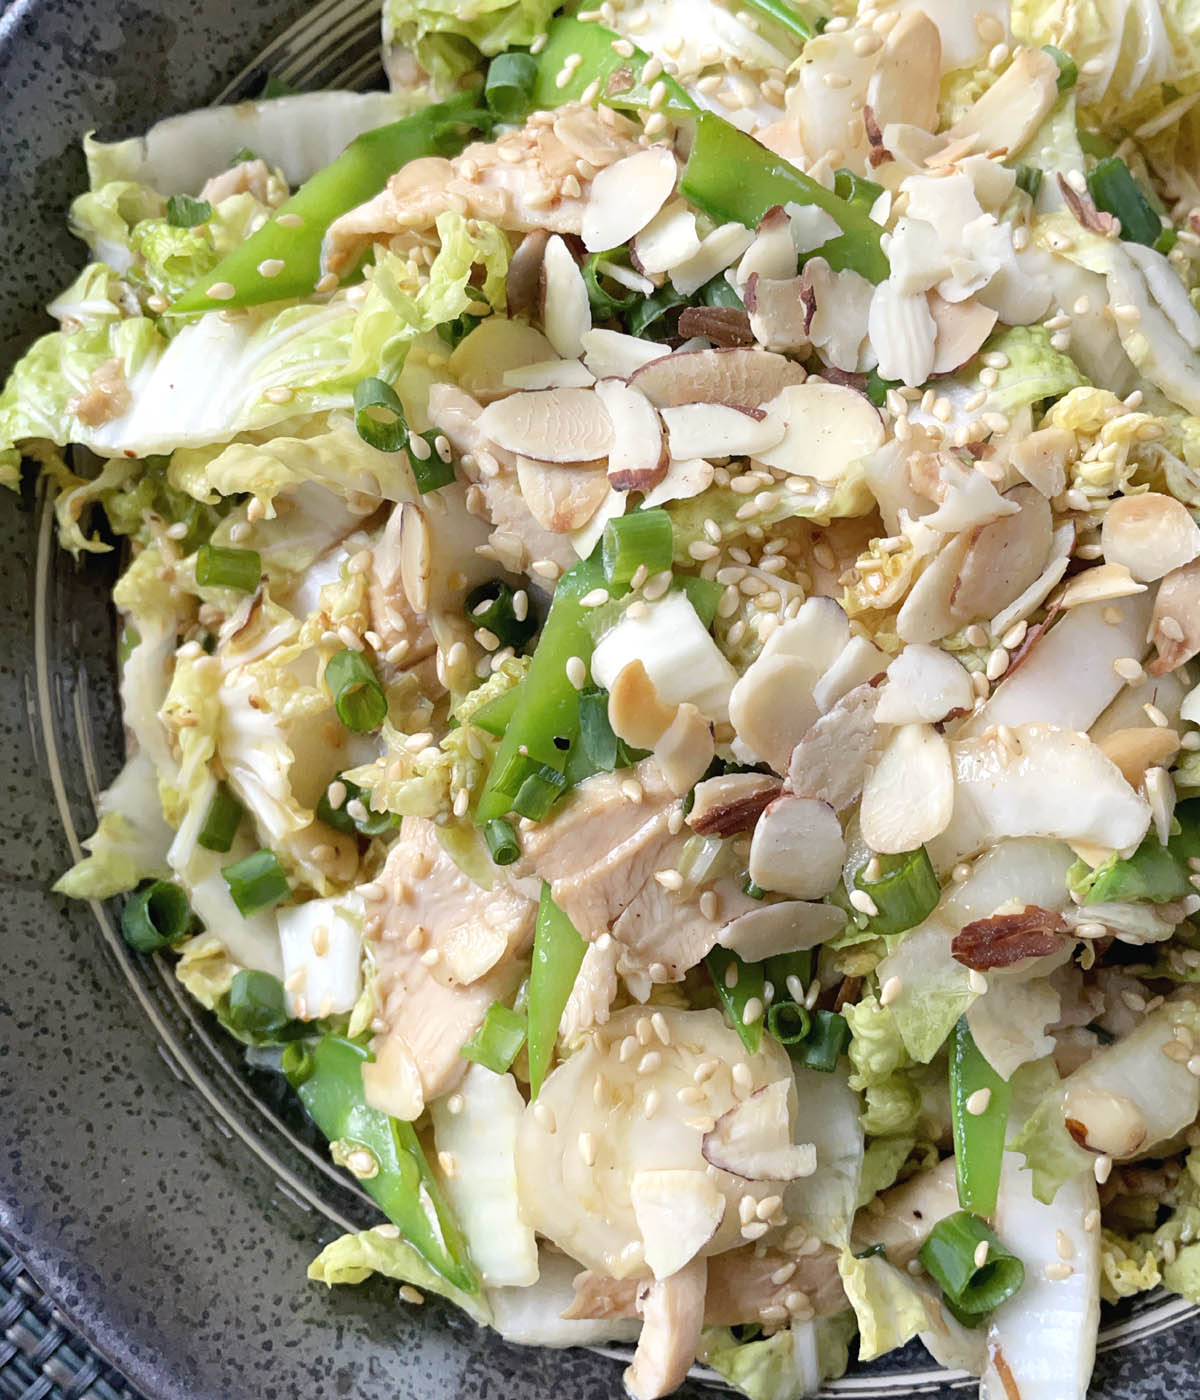 A dark round bowl containing chicken salad topped with sliced almonds, green onions, and sesame seeds.